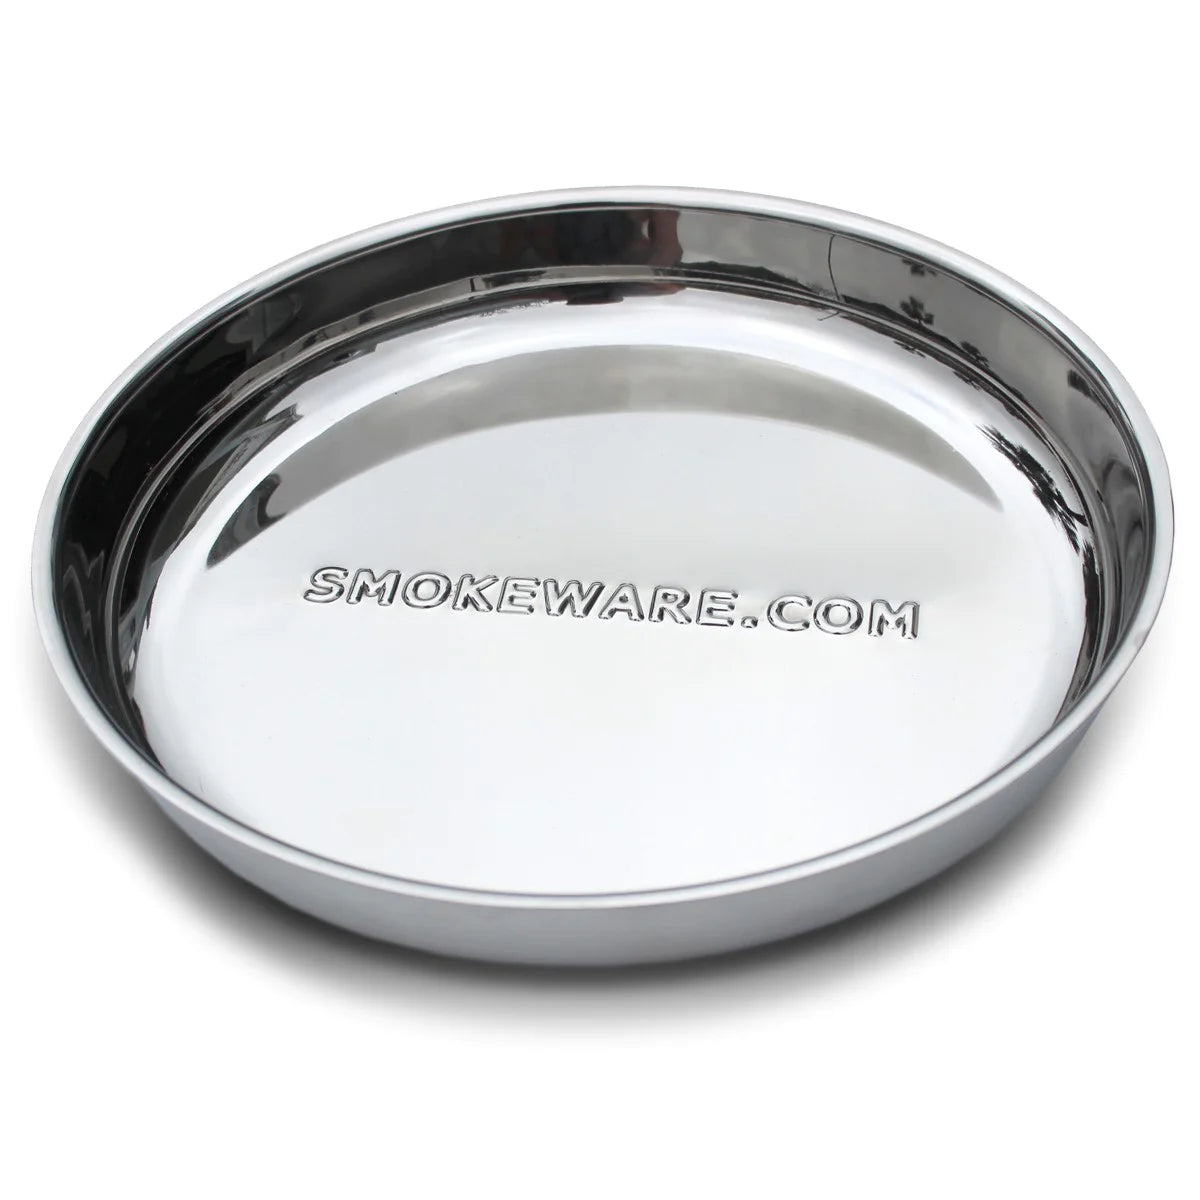 Smokeware Heavy Duty Thick Stainless Steel Drip Pan - Large Classic / 14" Inch